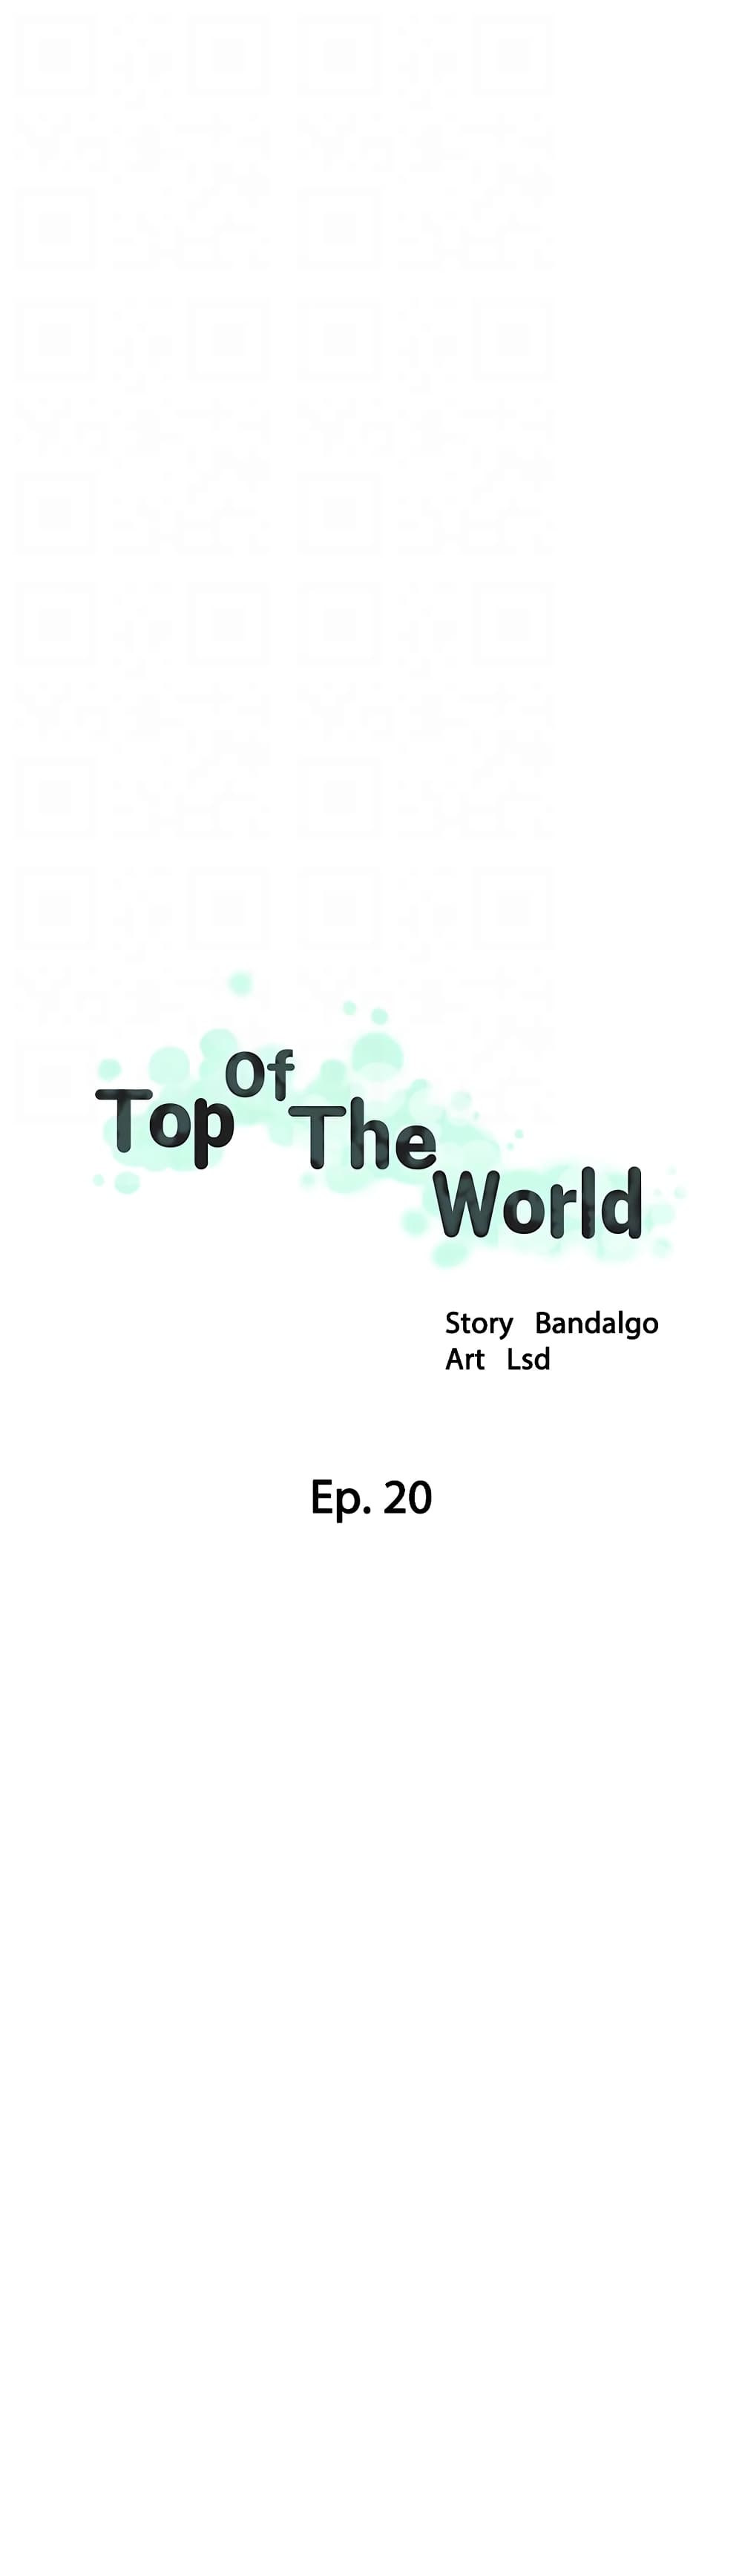 Top Of The World 20-20